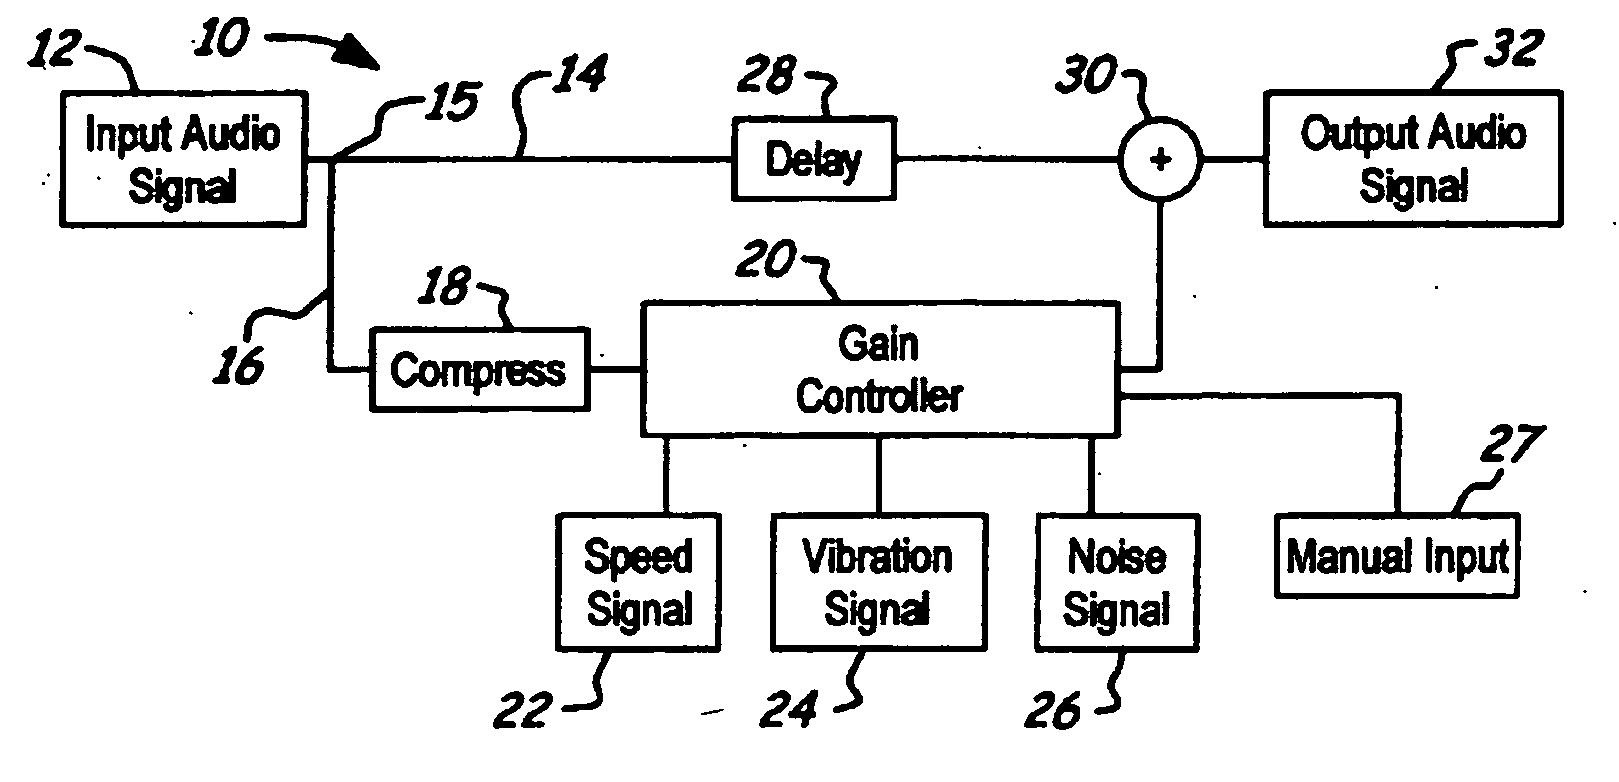 NVH dependent parallel compression processing for automotive audio systems